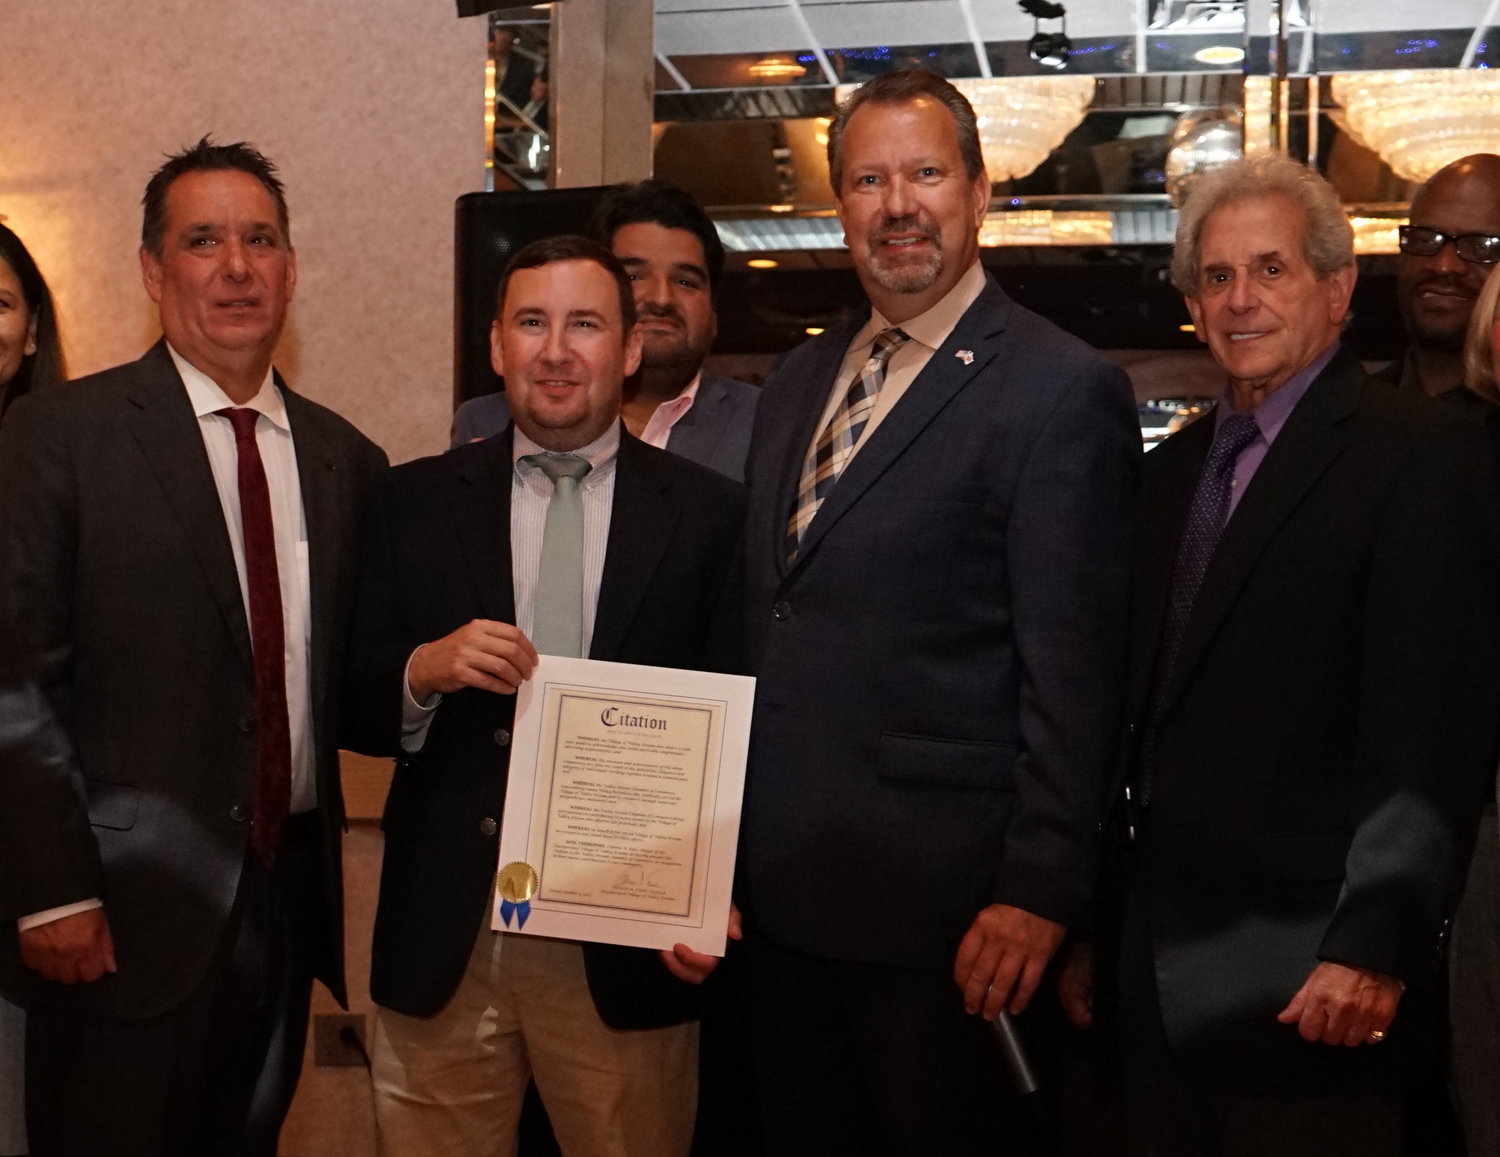 Lee Feinman, far right, with village Trustee John Tufarelli, left, Valley Stream Chamber of Commerce President Dominick Minerva and Mayor Ed Fare at a chamber dinner last month. Feinman was honored as the 2019 Nassau Council of Chambers of Commerce Businessperson of the Year for Valley Stream.